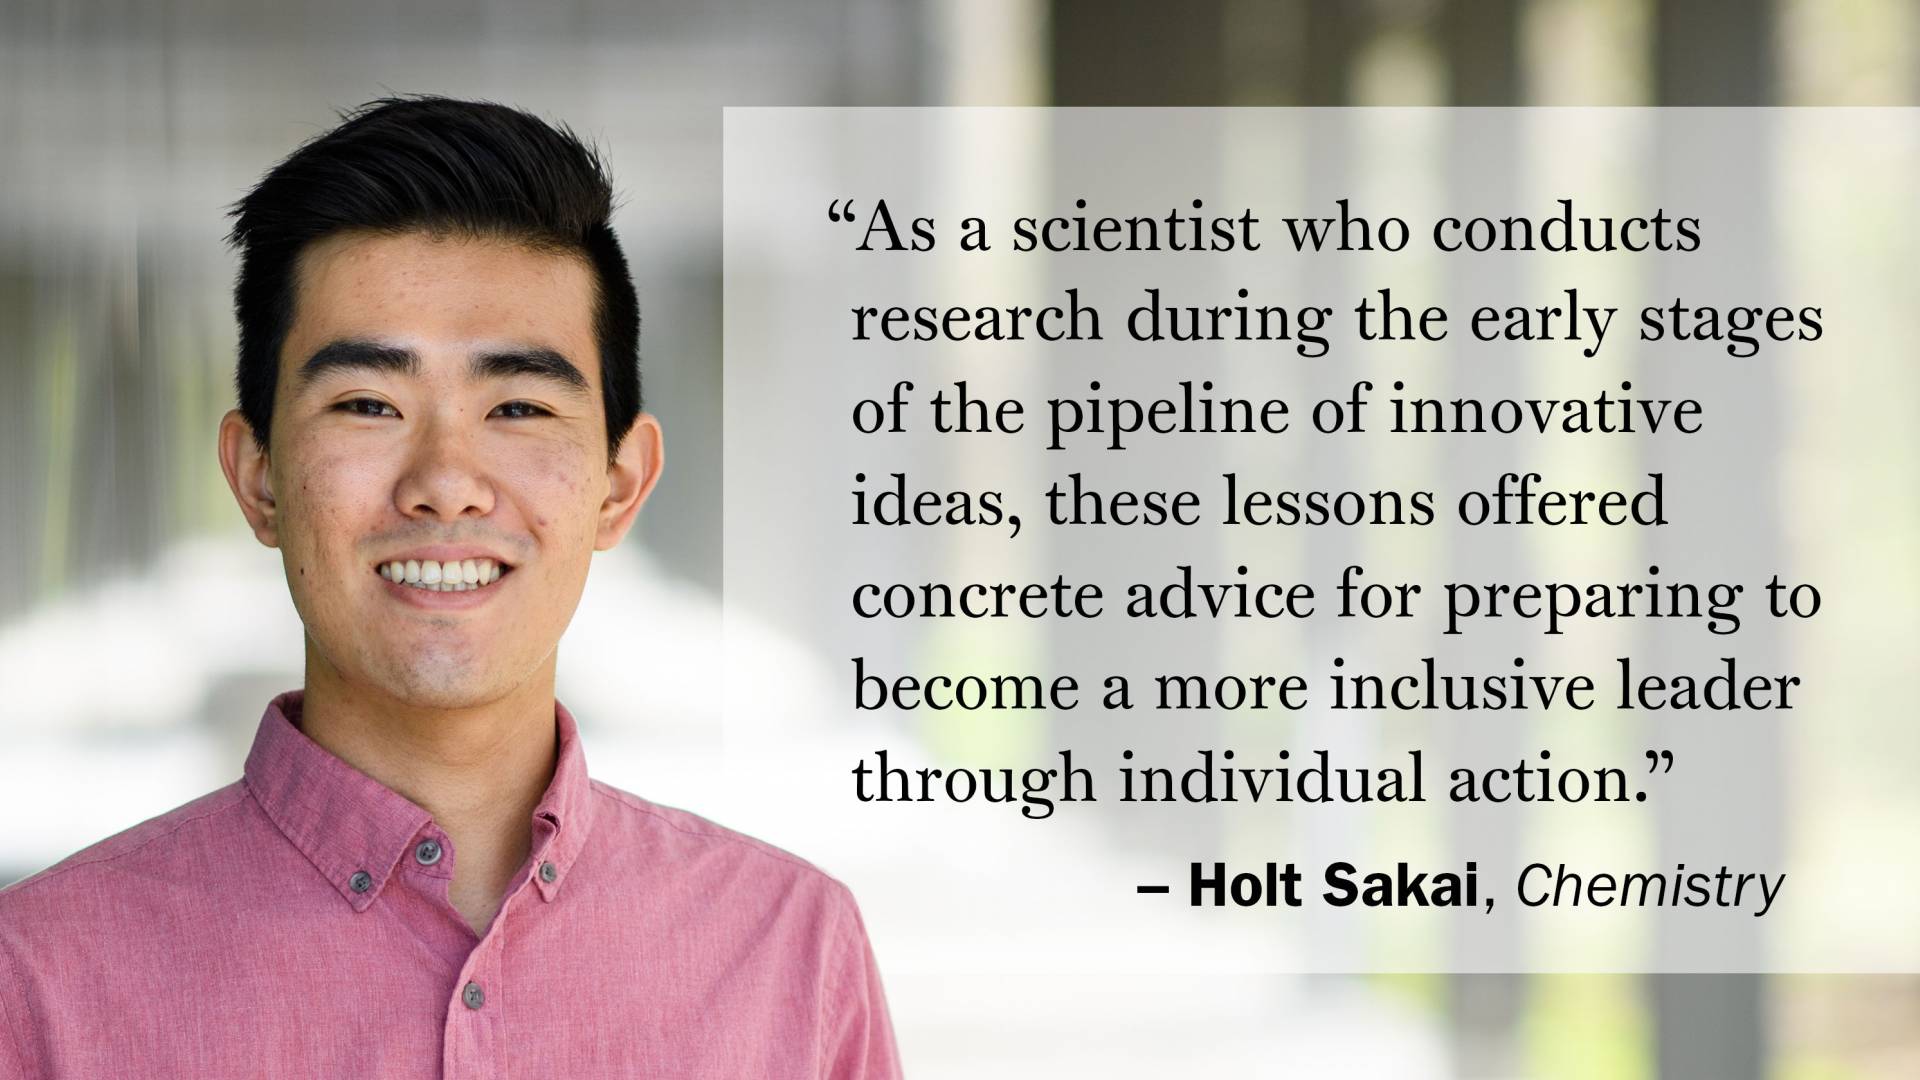 "As a scientist who conducts research during the early stages of the pipeline of innovative ideas, these lessons offered concrete advice for preparing to become a more inclusive leader through individual action." —Holt Sakai, Chemistry